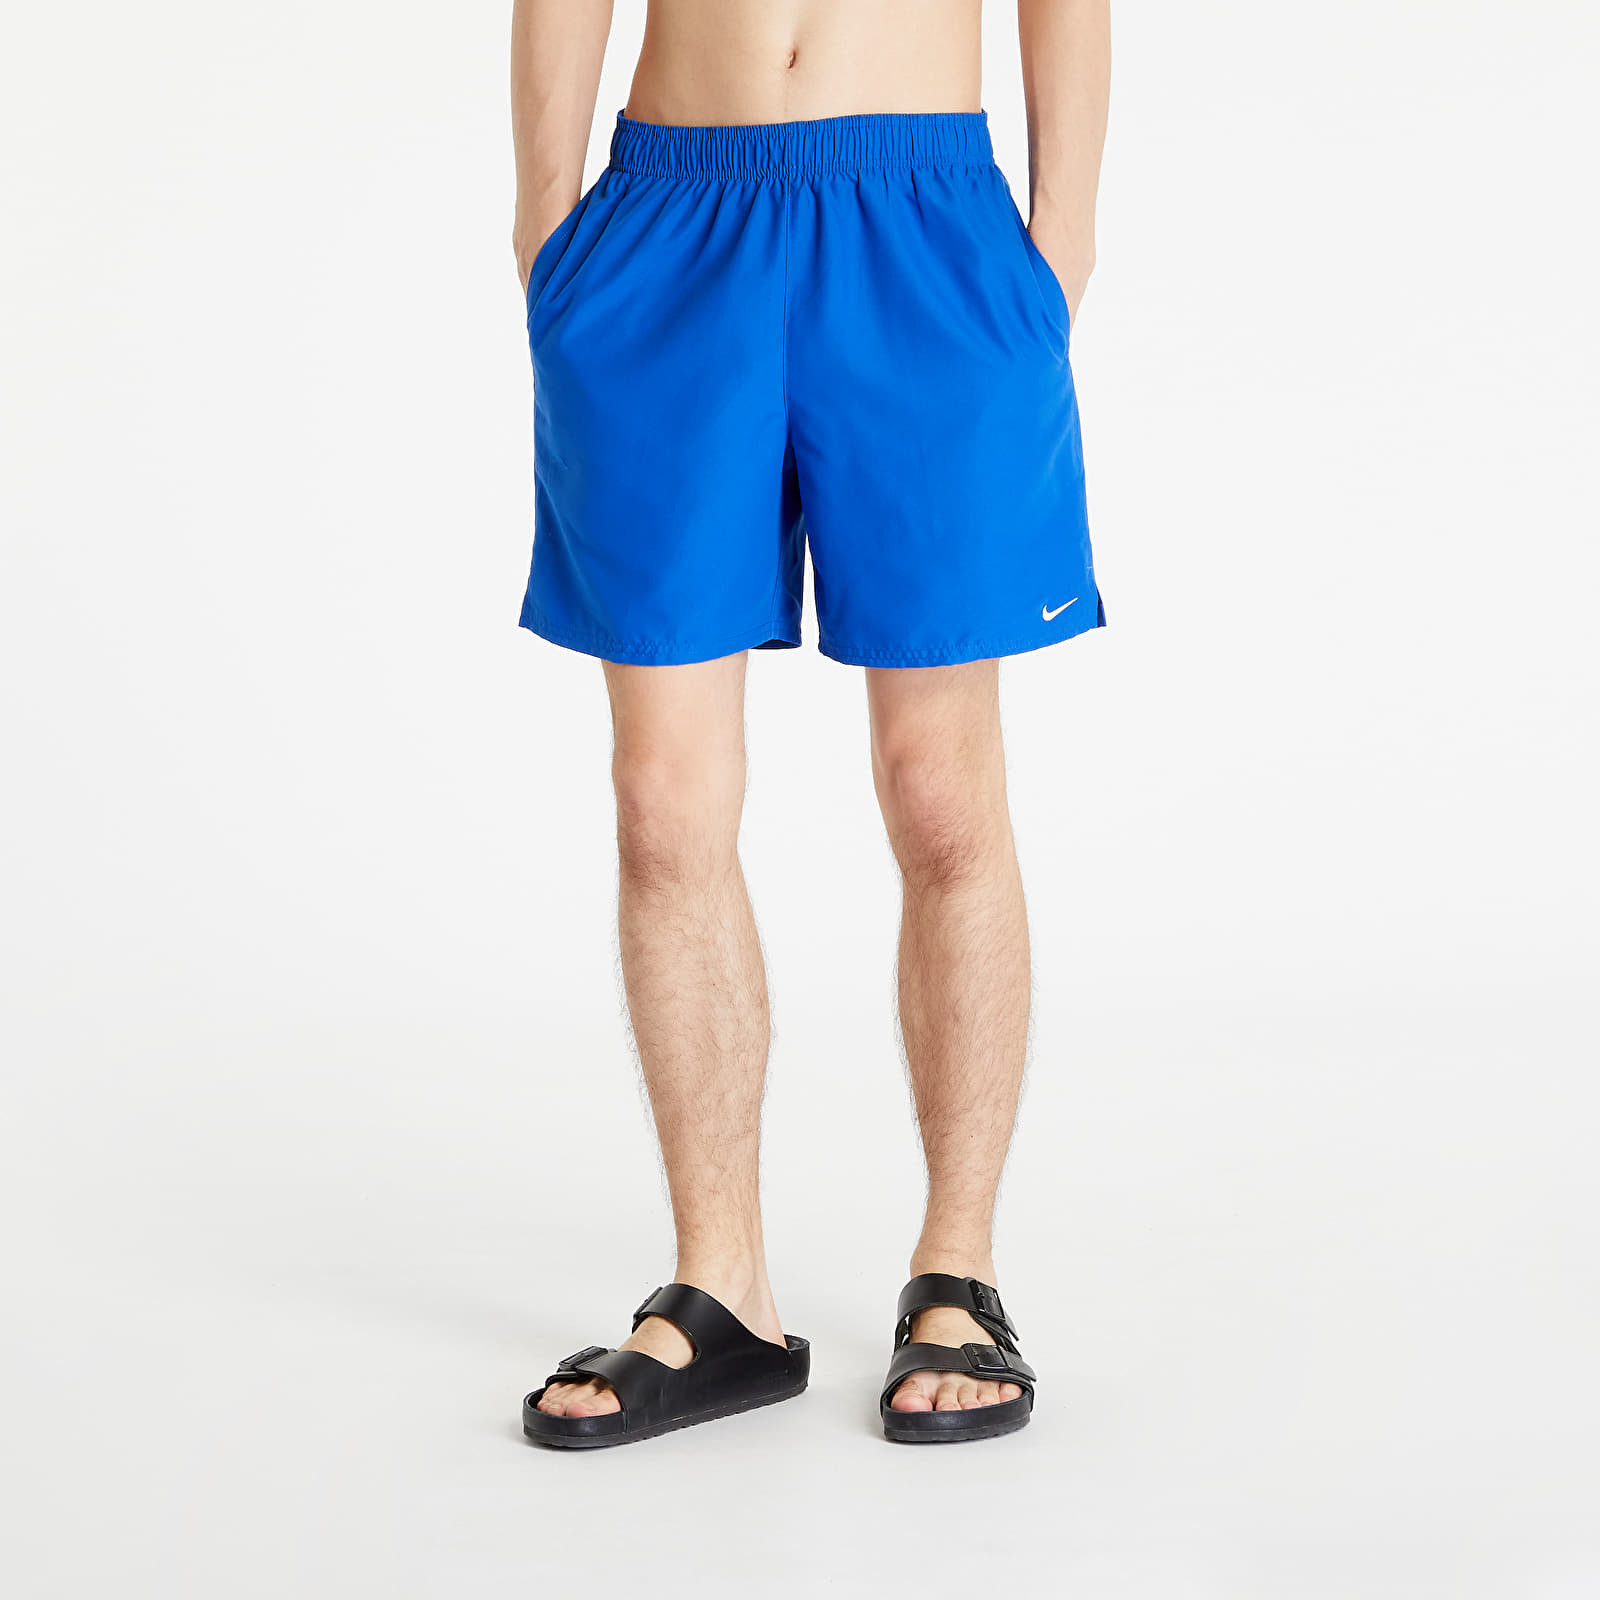 Nike - essential 7" volley short game royal